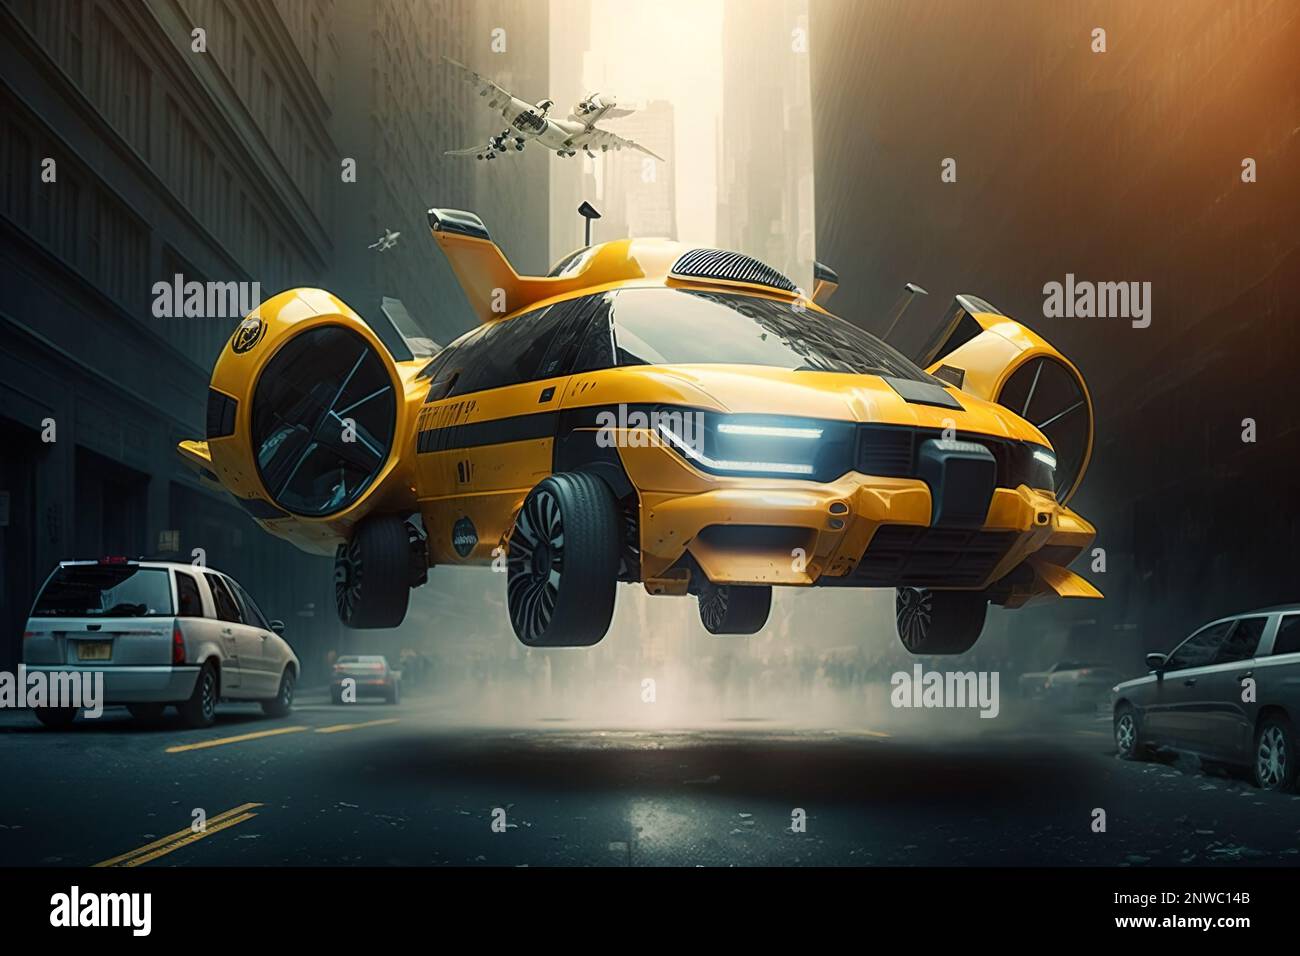 Air taxi car in city, futuristic flying yellow cab takes off or landing on street, generative AI. Flight of VTOL electric passenger vehicle. Concept o Stock Photo